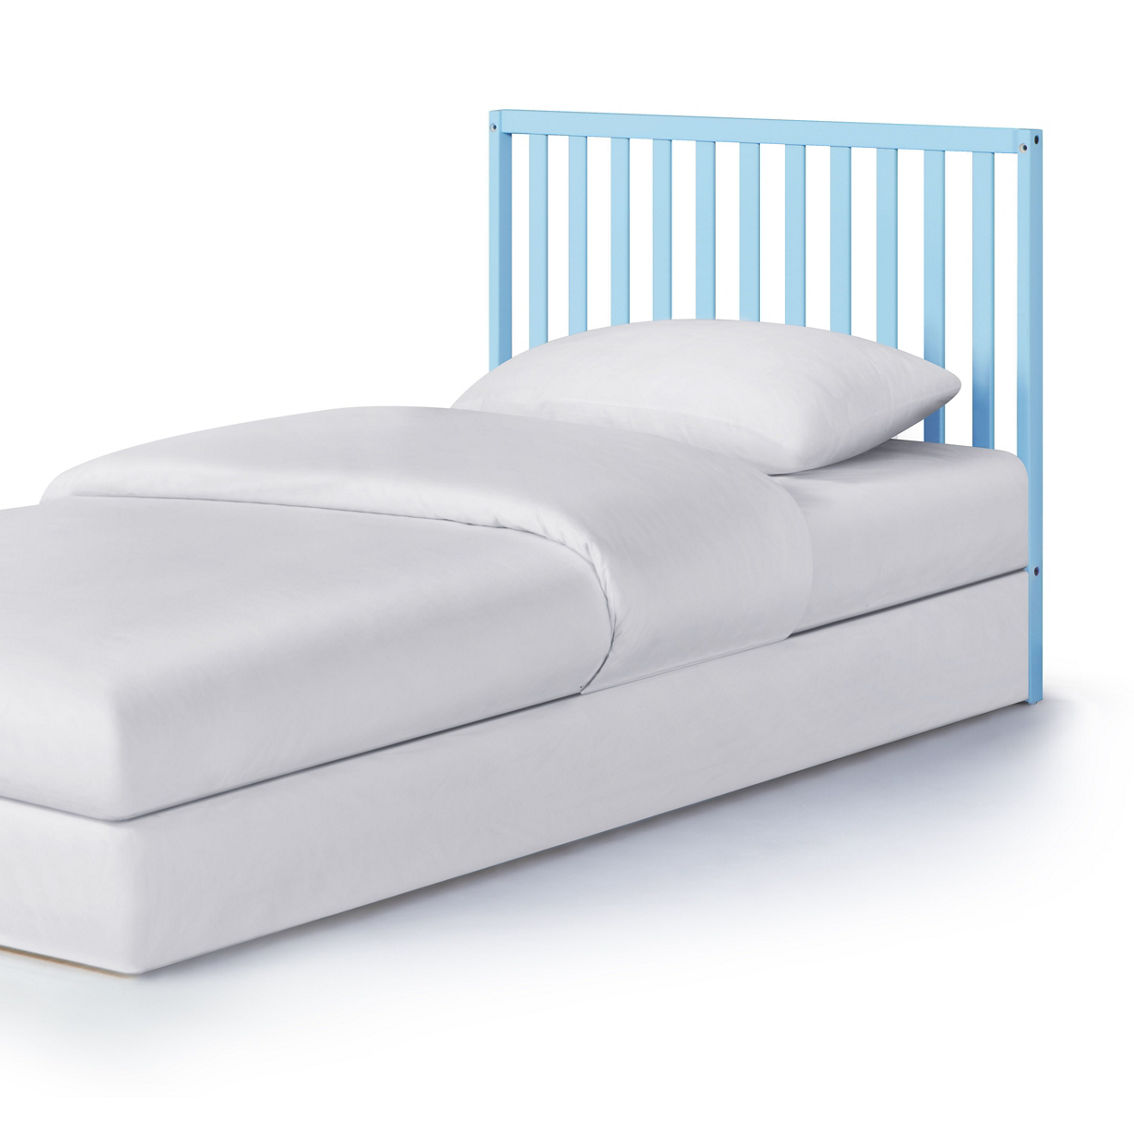 Suite Bebe Palmer Mini Crib Baby Blue with Mattress pad - Image 5 of 5